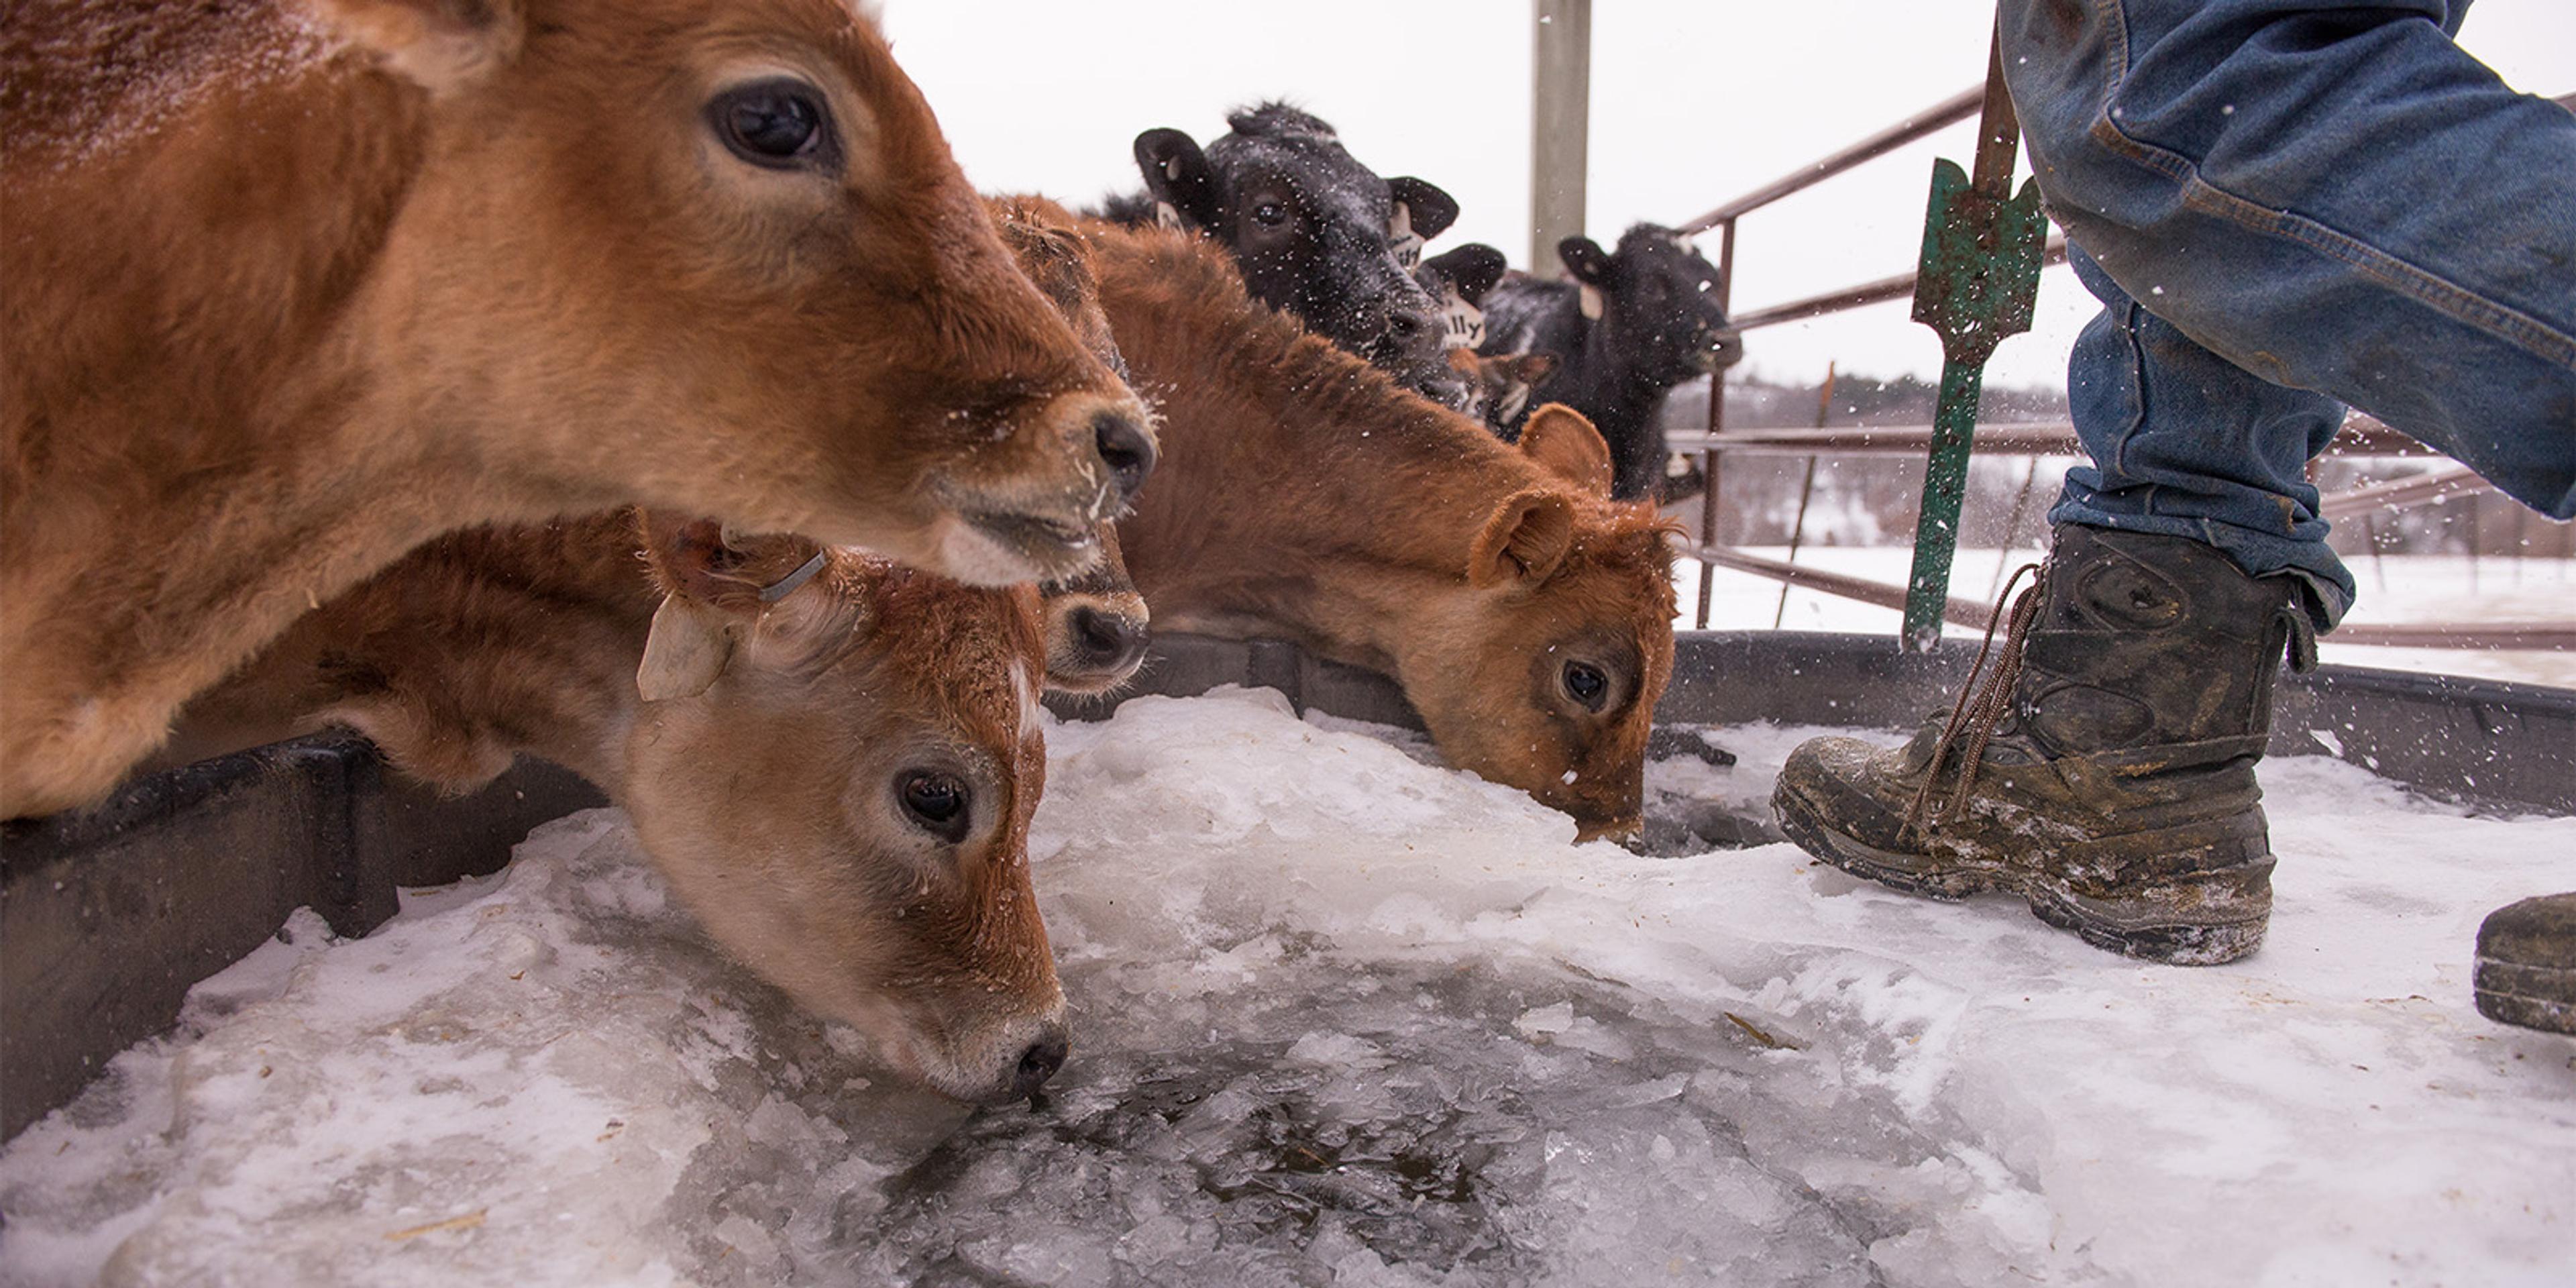 Calves drink water while a farmer chips at ice in a trough.